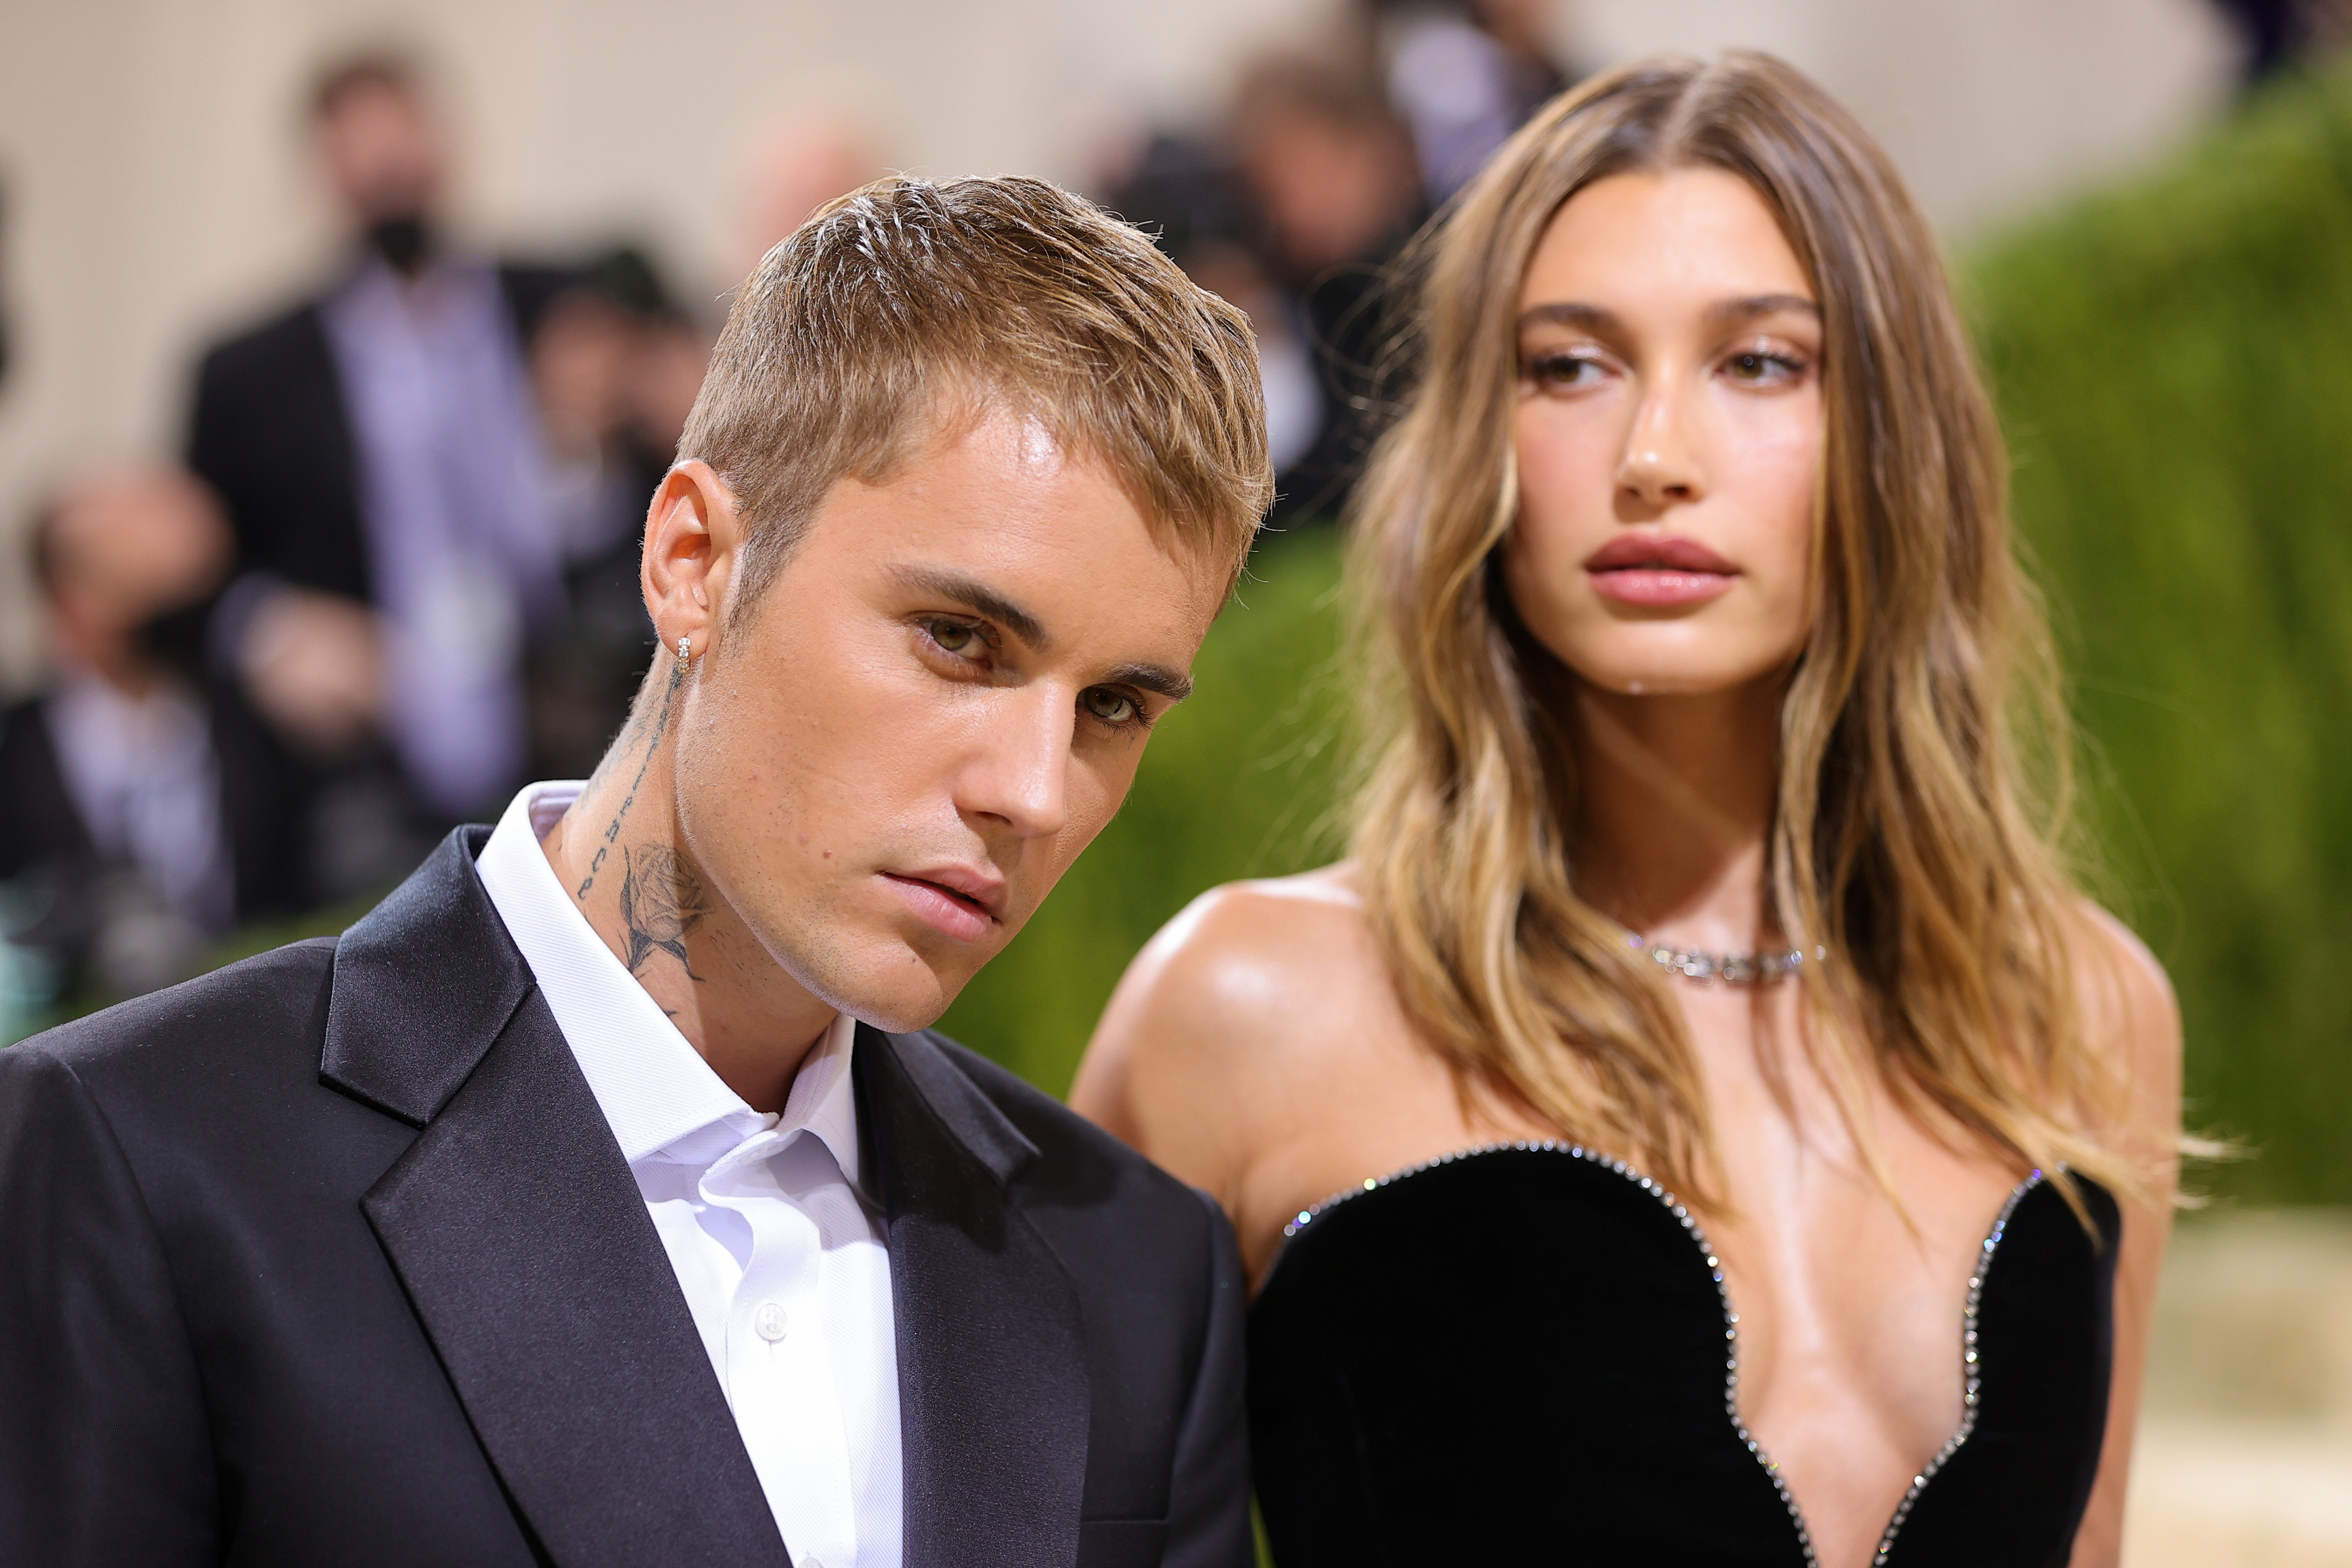 A source recently told The U.S. Sun that although Justin and Hailey are going through a rough patch, divorce isn't on the table